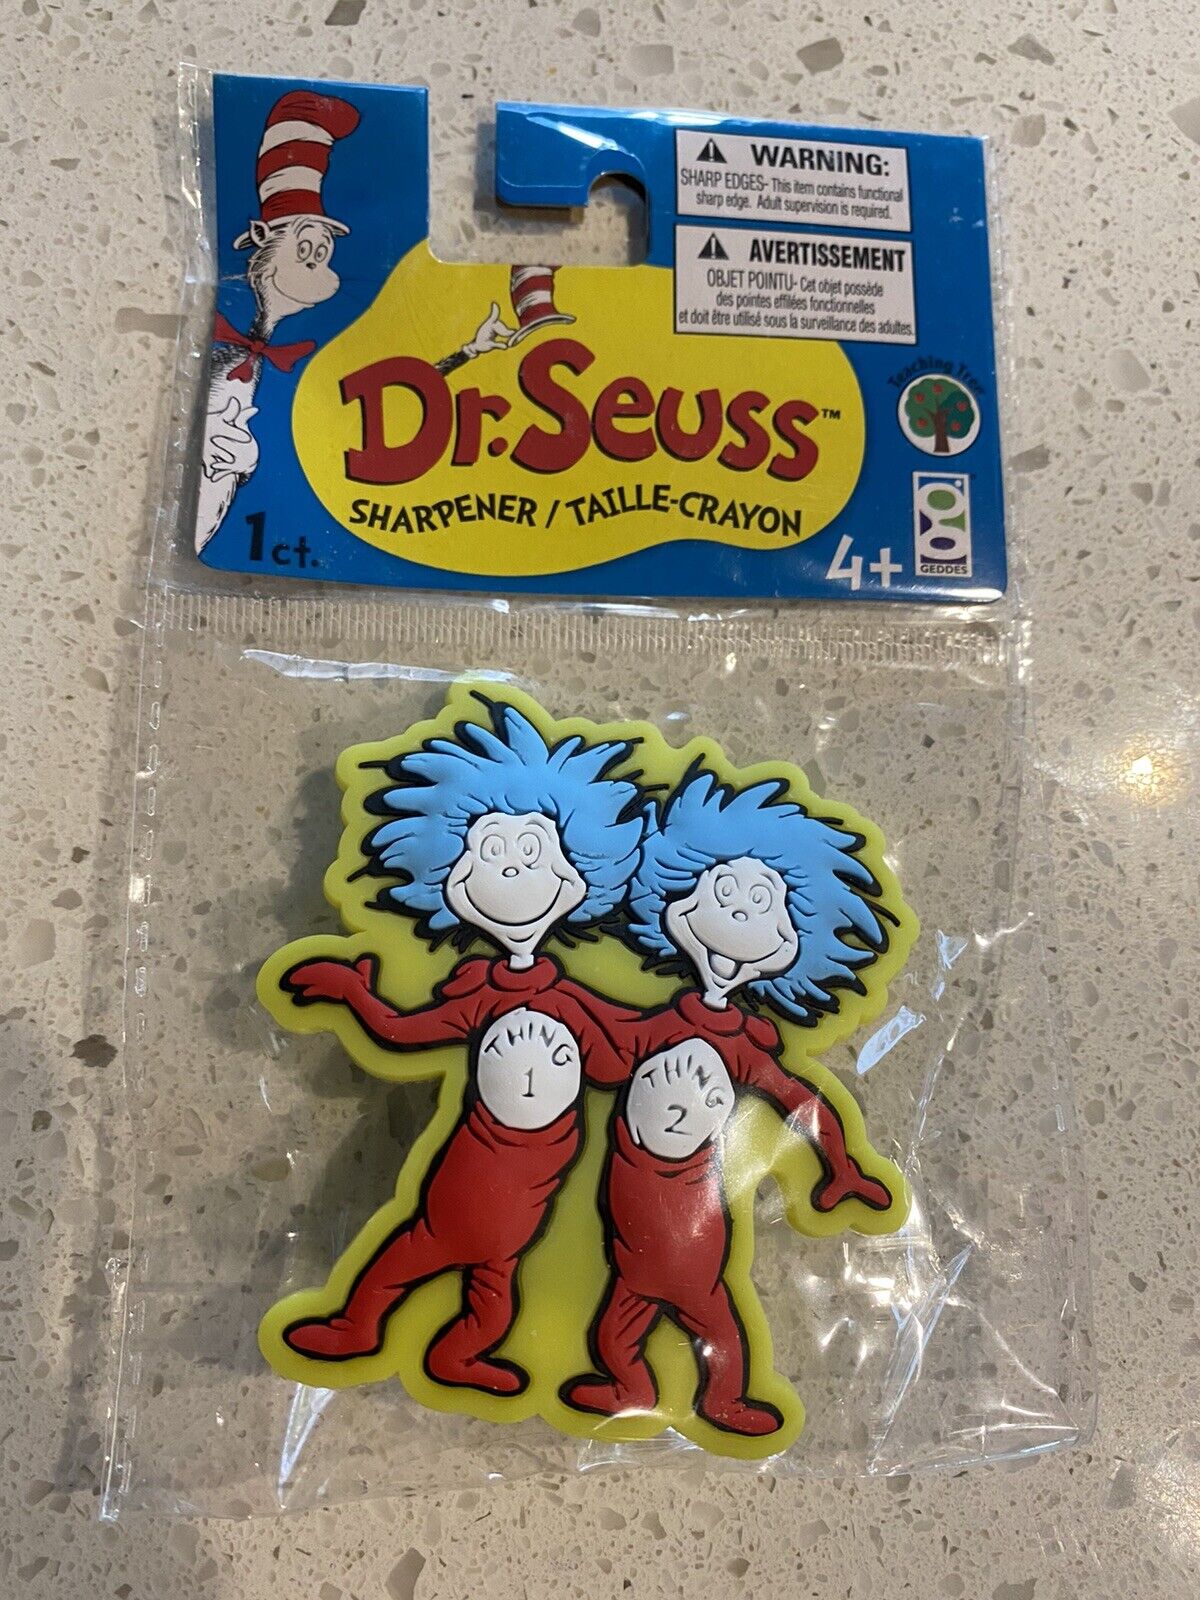 Dr. Seuss™ Characters Laser Cut Pencil Sharpeners Thing 1 & Thing 2 NEW